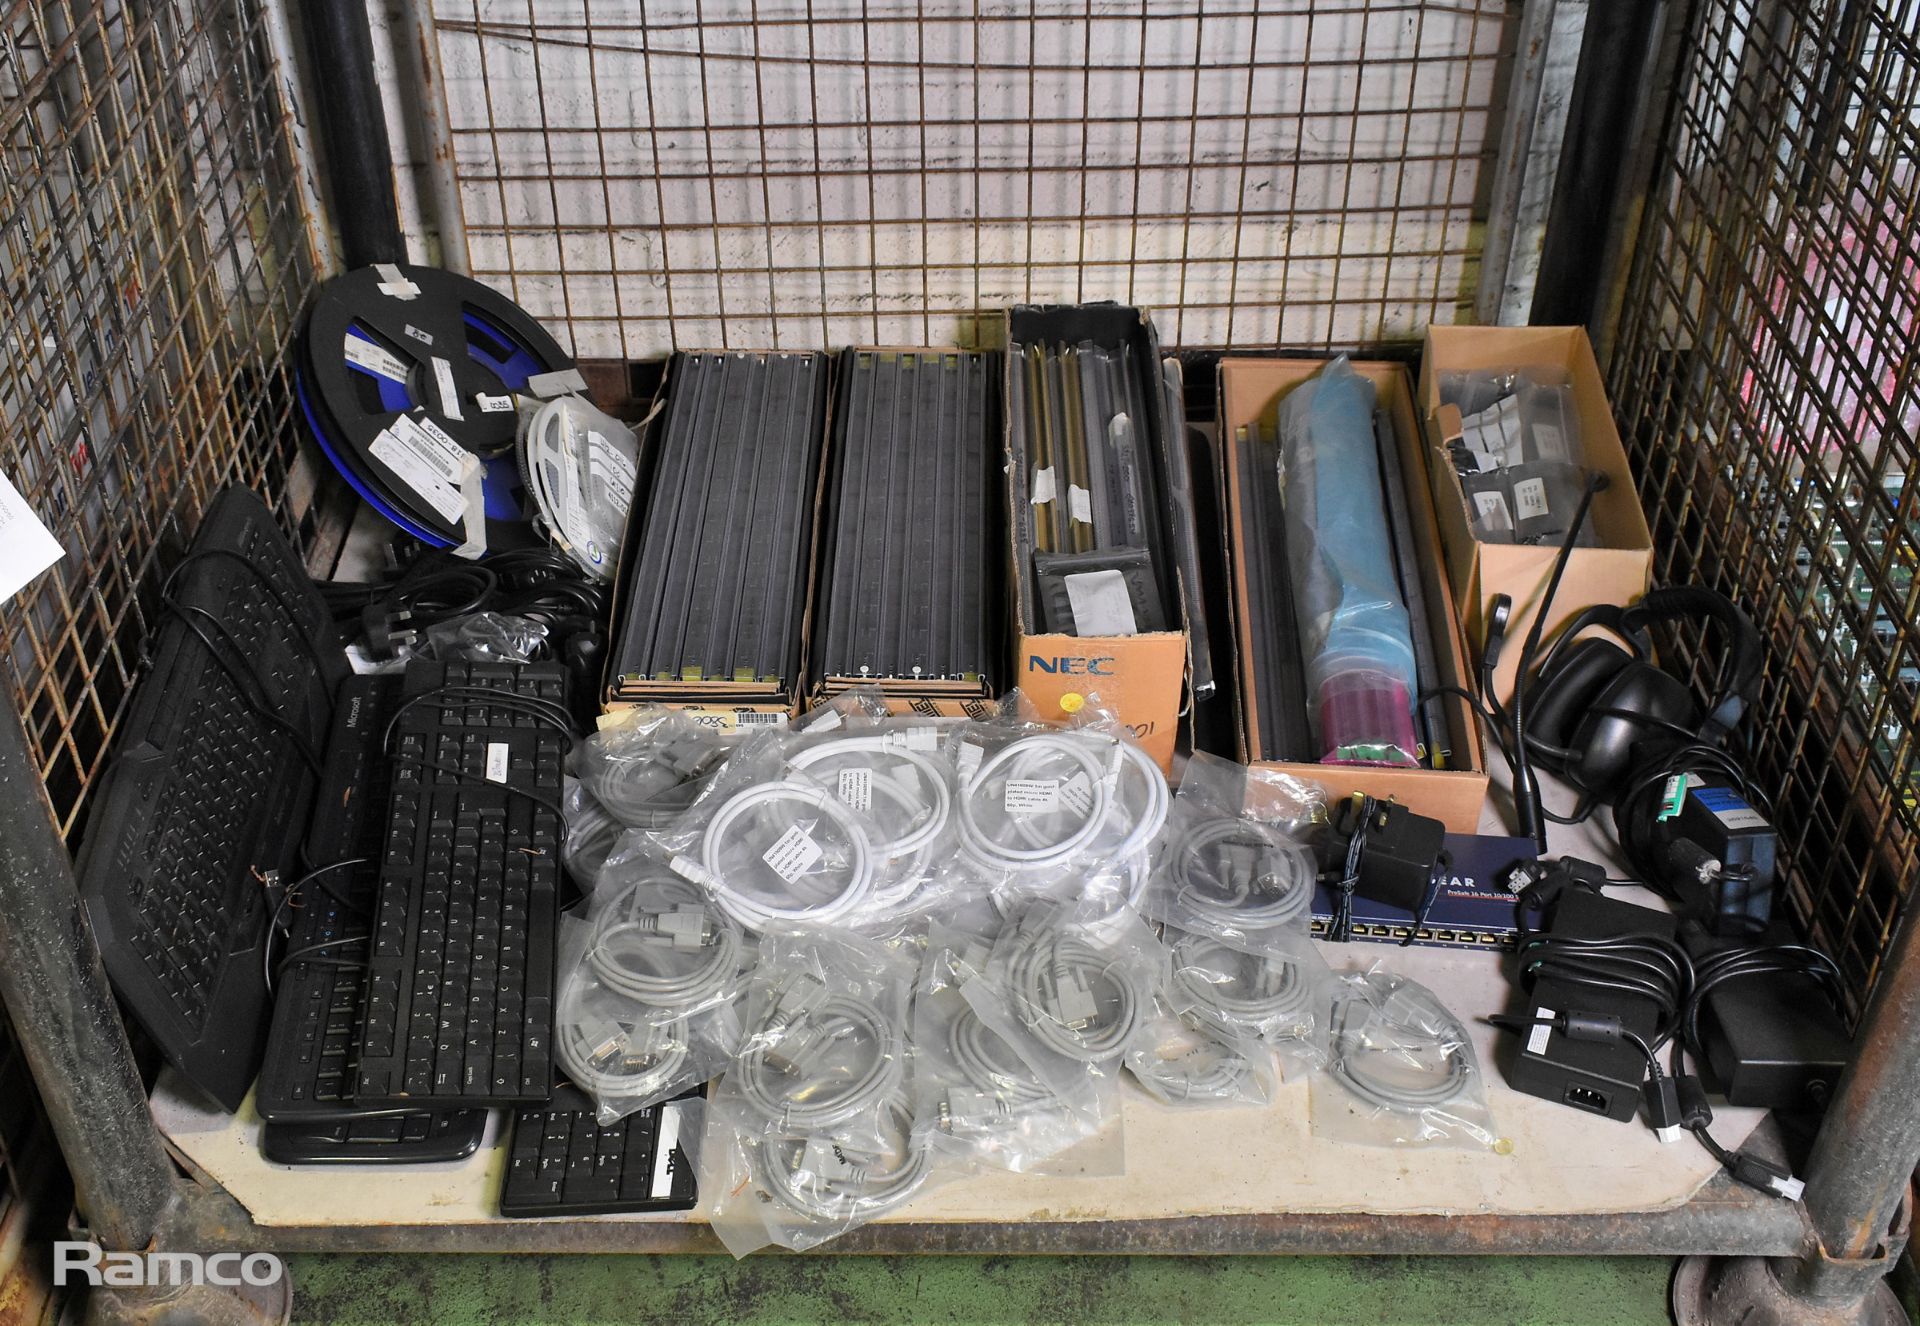 Electrical and computer spares - keyboards - memory chips - VGA to VGA cables